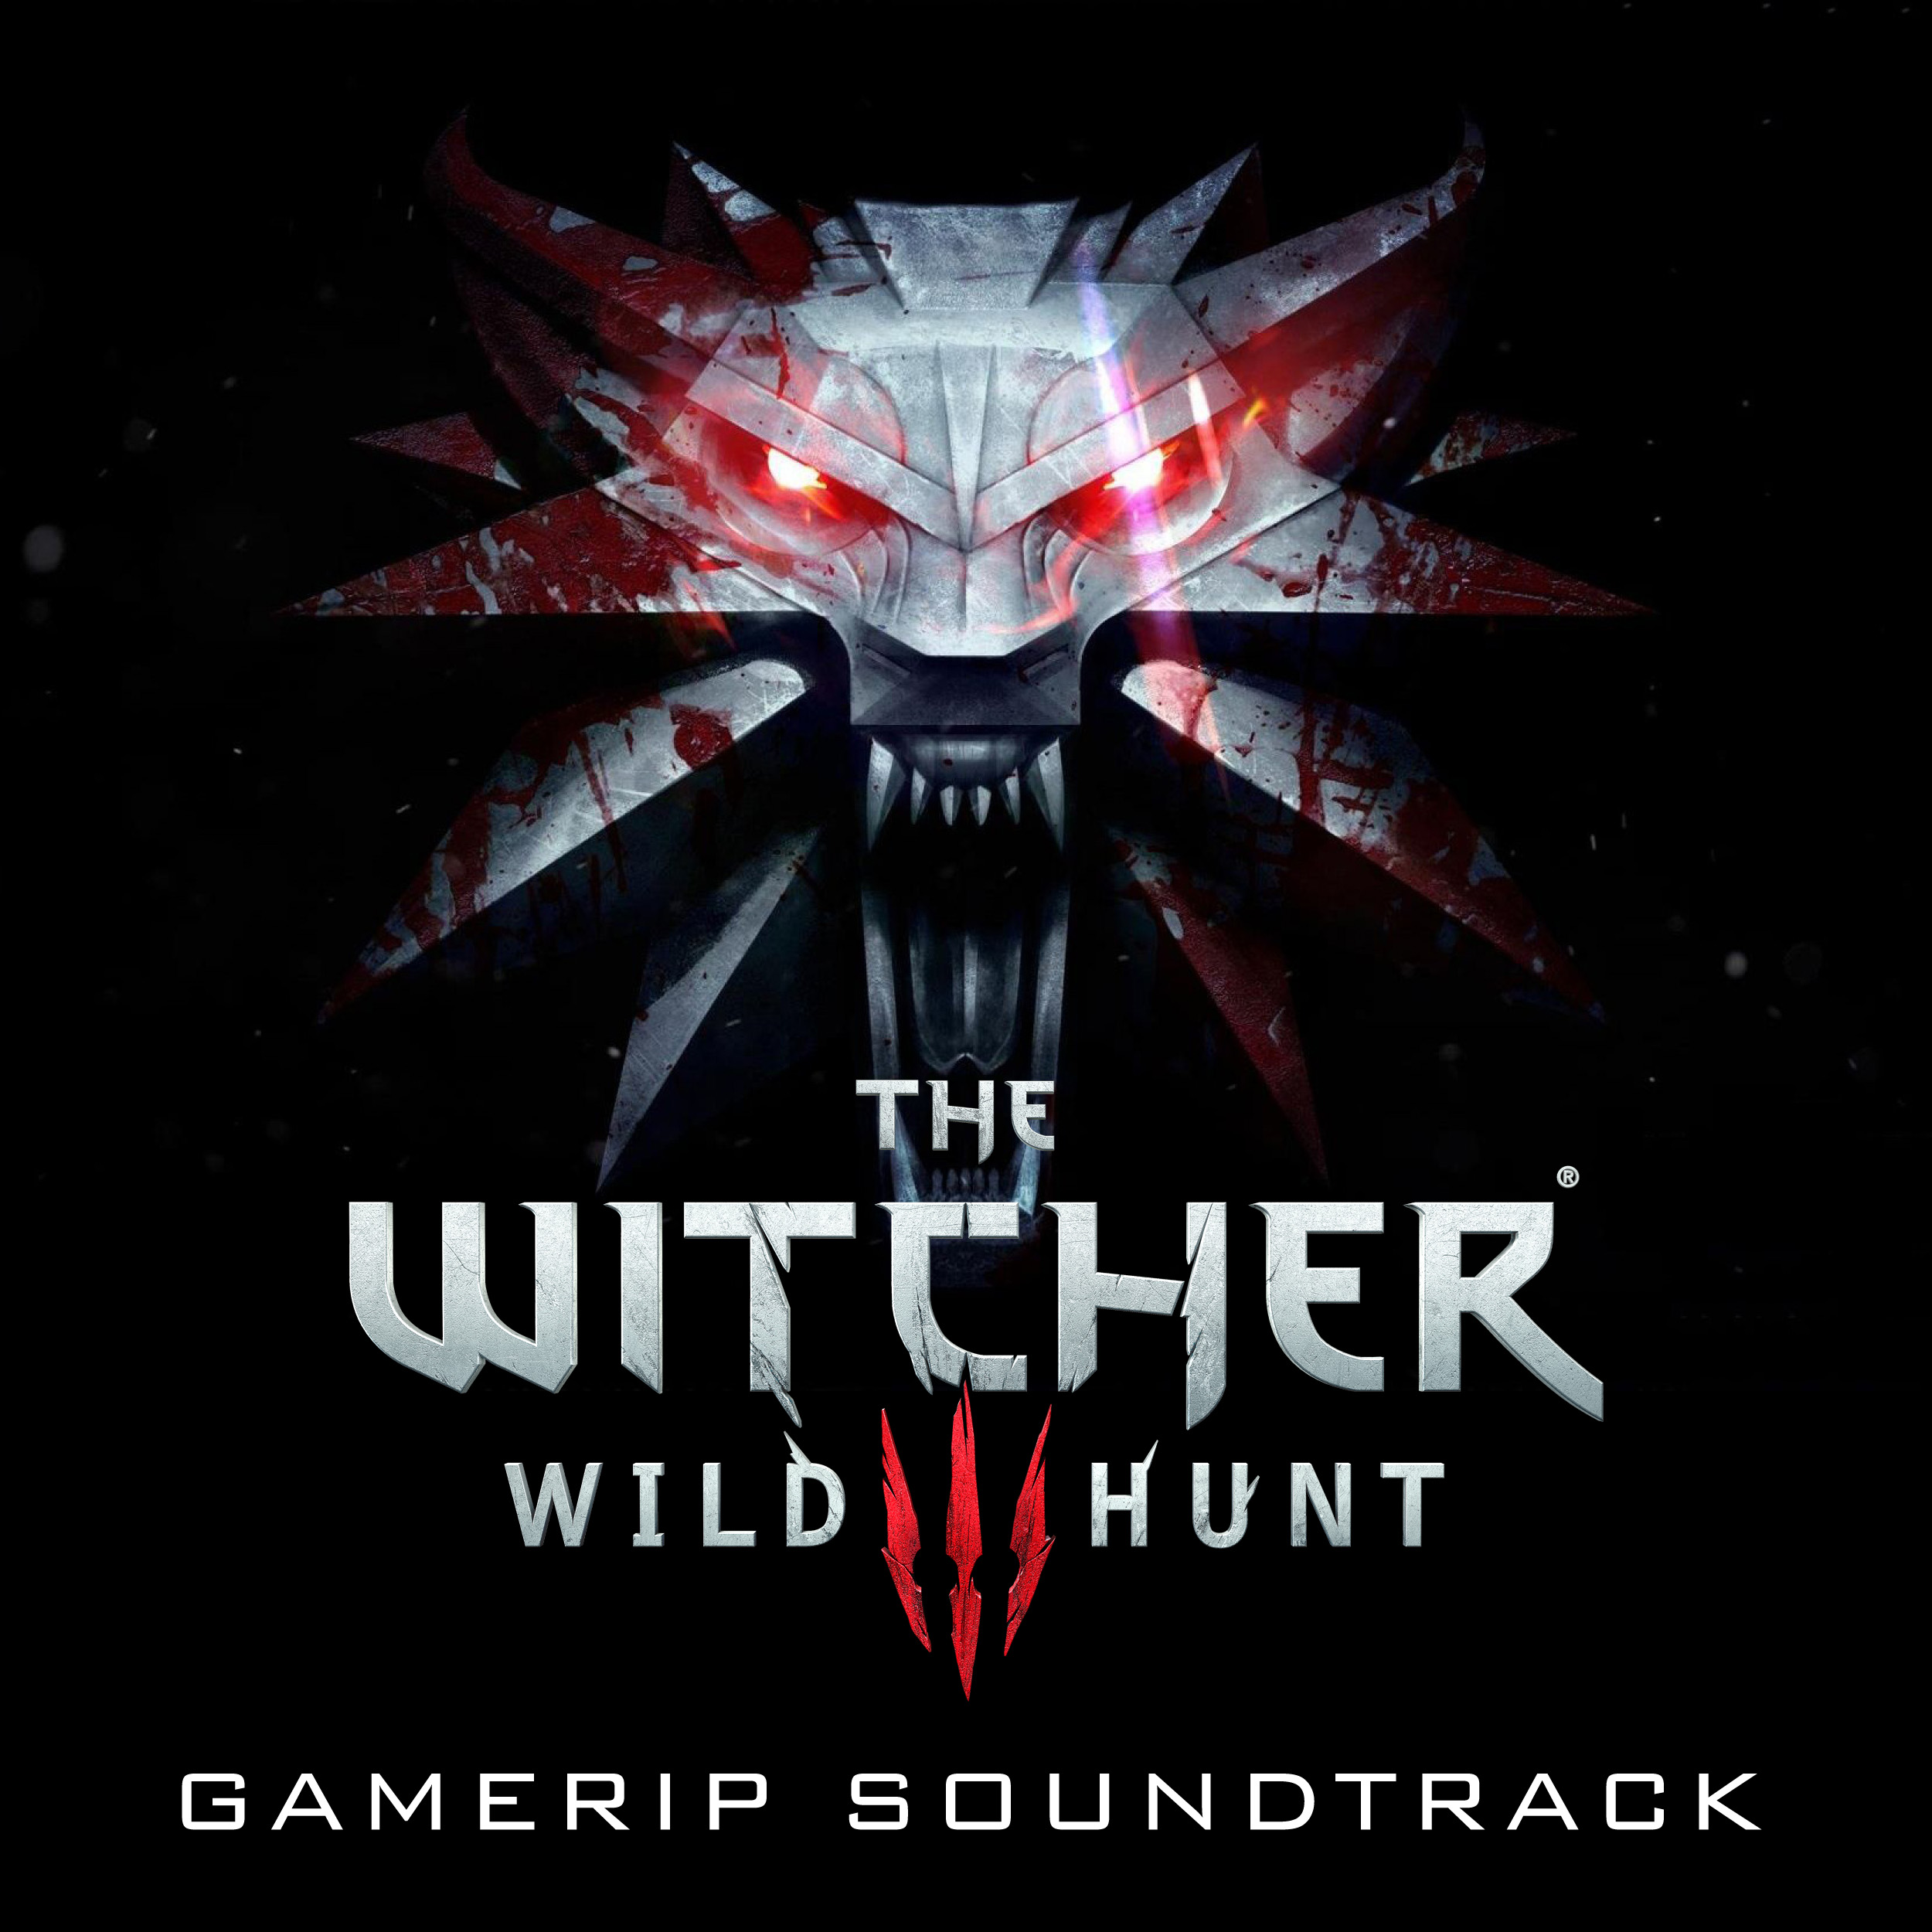 The witcher 3 soundtrack by фото 1